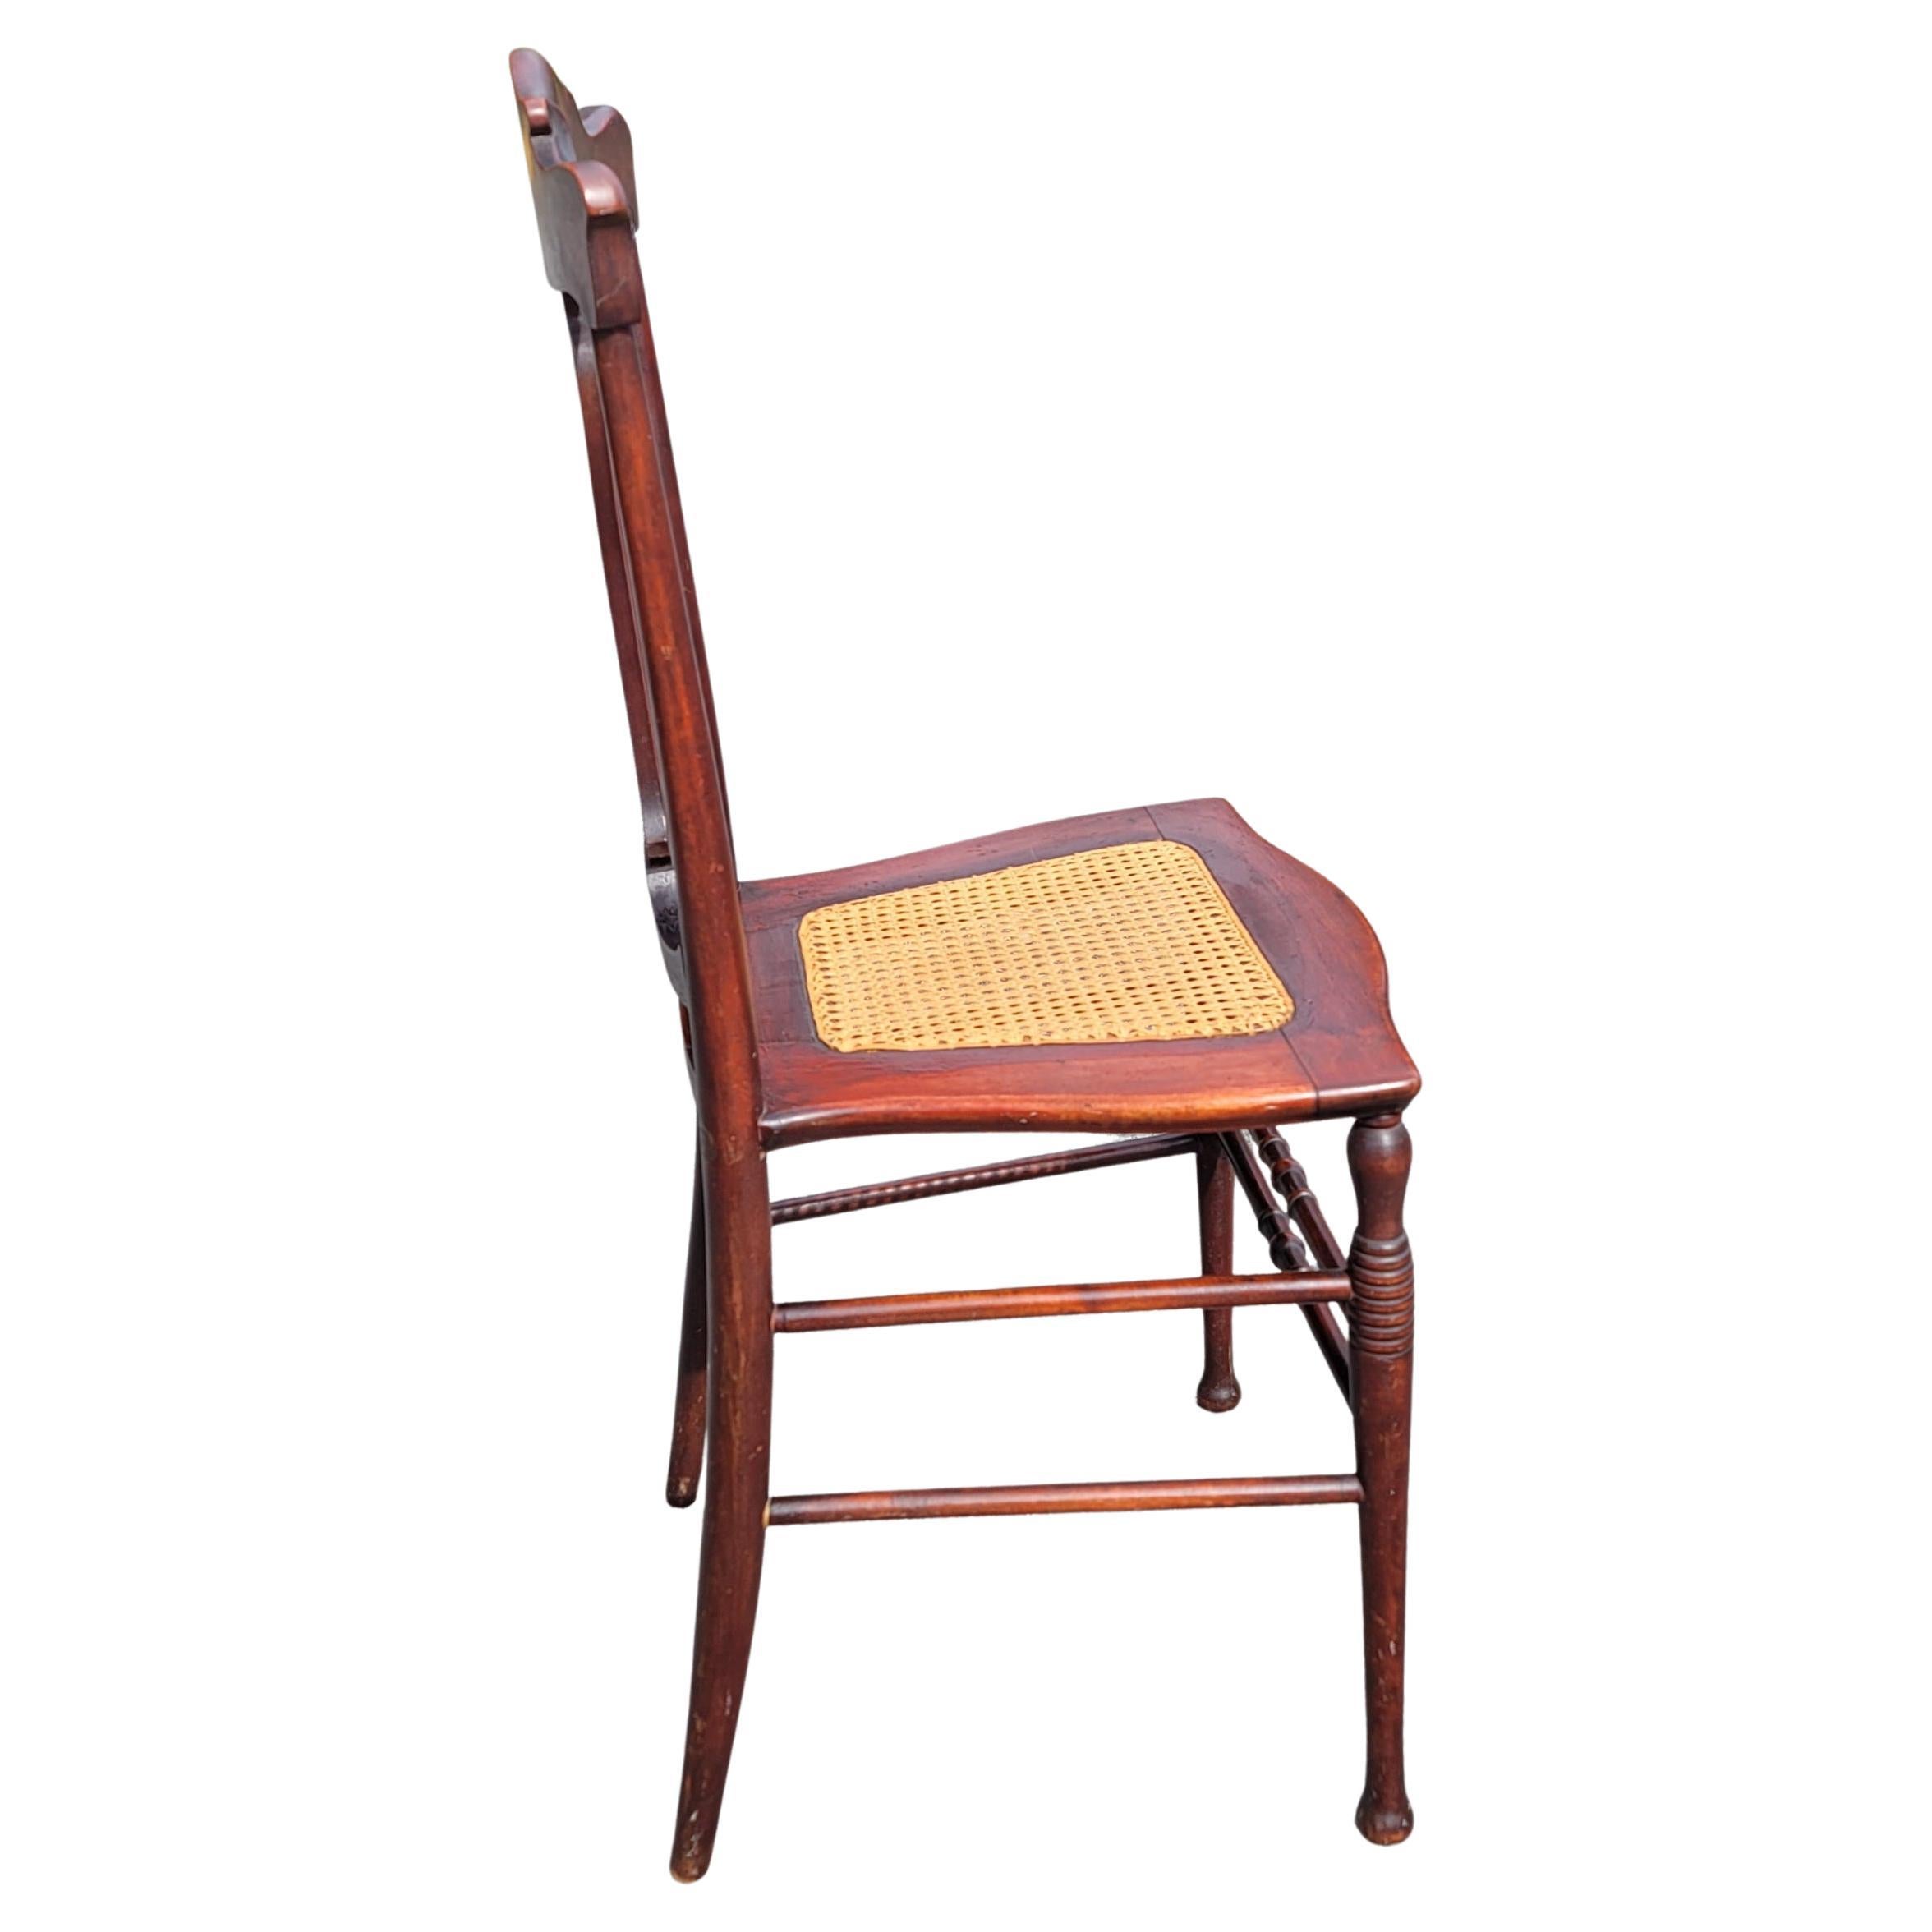 Refinished Early American Empire Mahogany and Cane Seat Chair In Good Condition For Sale In Germantown, MD